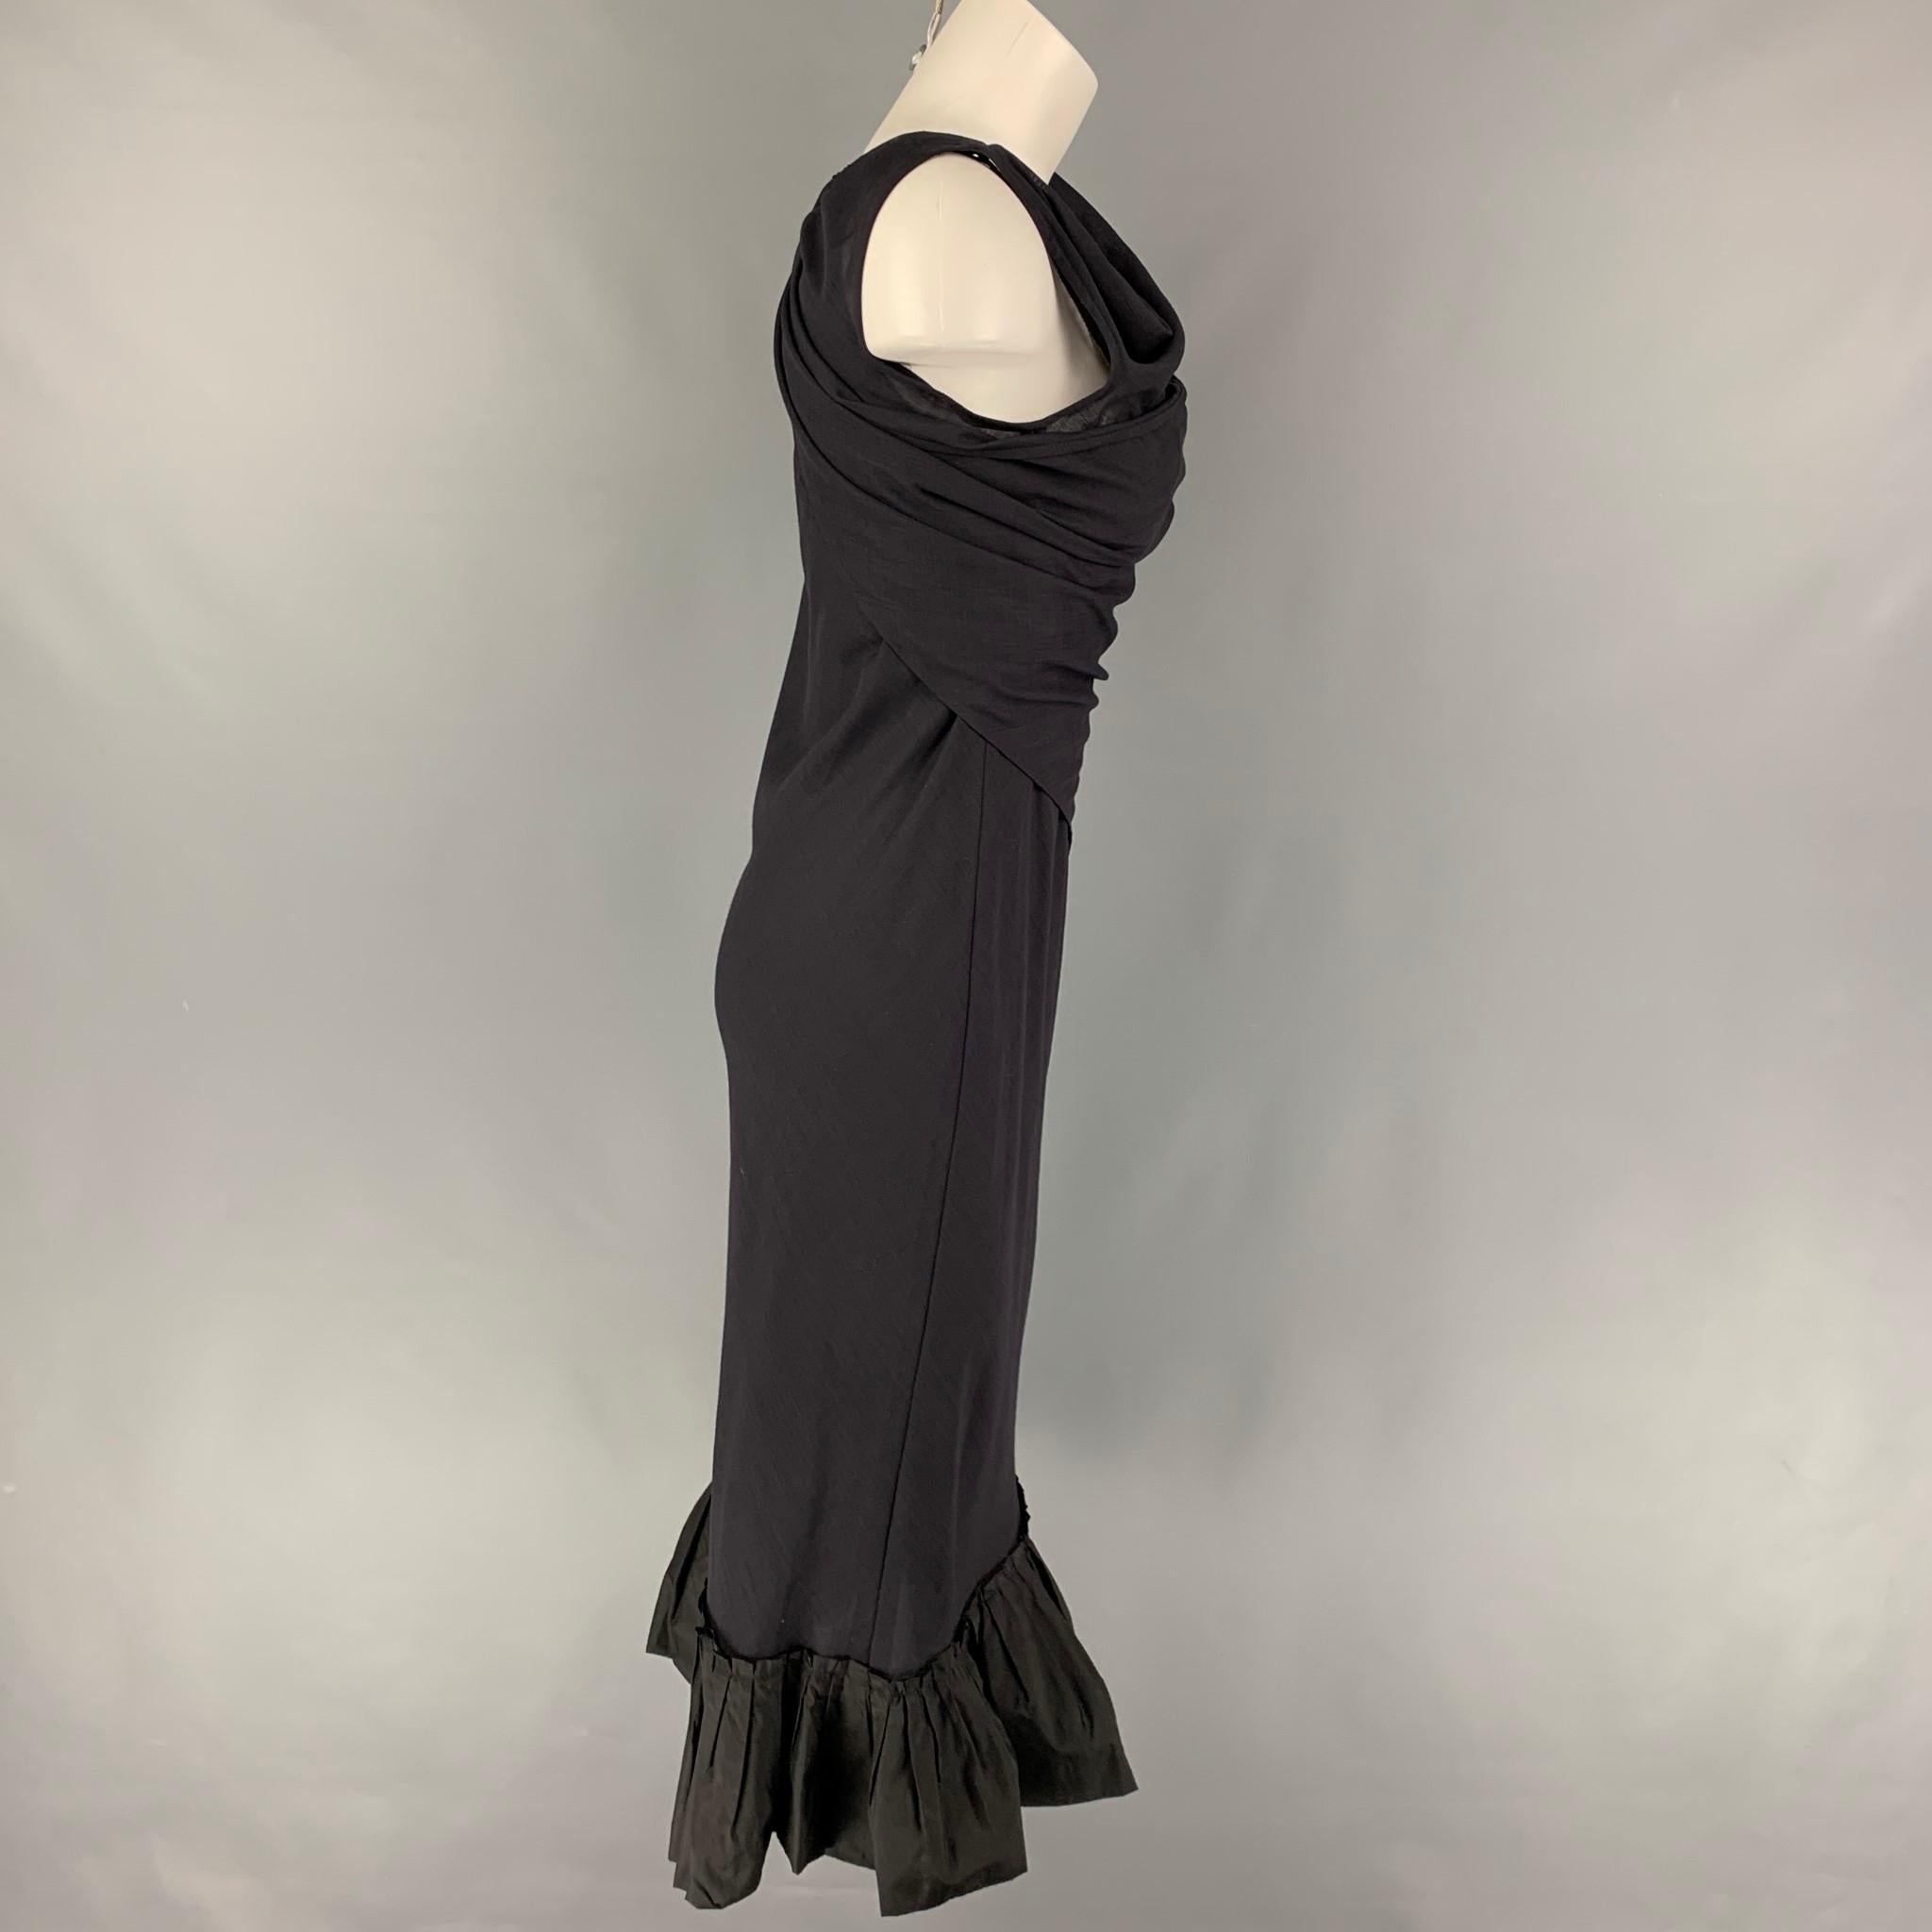 VERA WANG dress comes in a navy wool featuring a wrap around panel, ruffled trim, sleeveless, and a back zip up closure. 

Very Good Pre-Owned Condition.
Marked: 4

Measurements:

Shoulder:
Bust: 28 in.
Waist: 26 in.
Hip: 33 in.
Length: 45.5 in. 